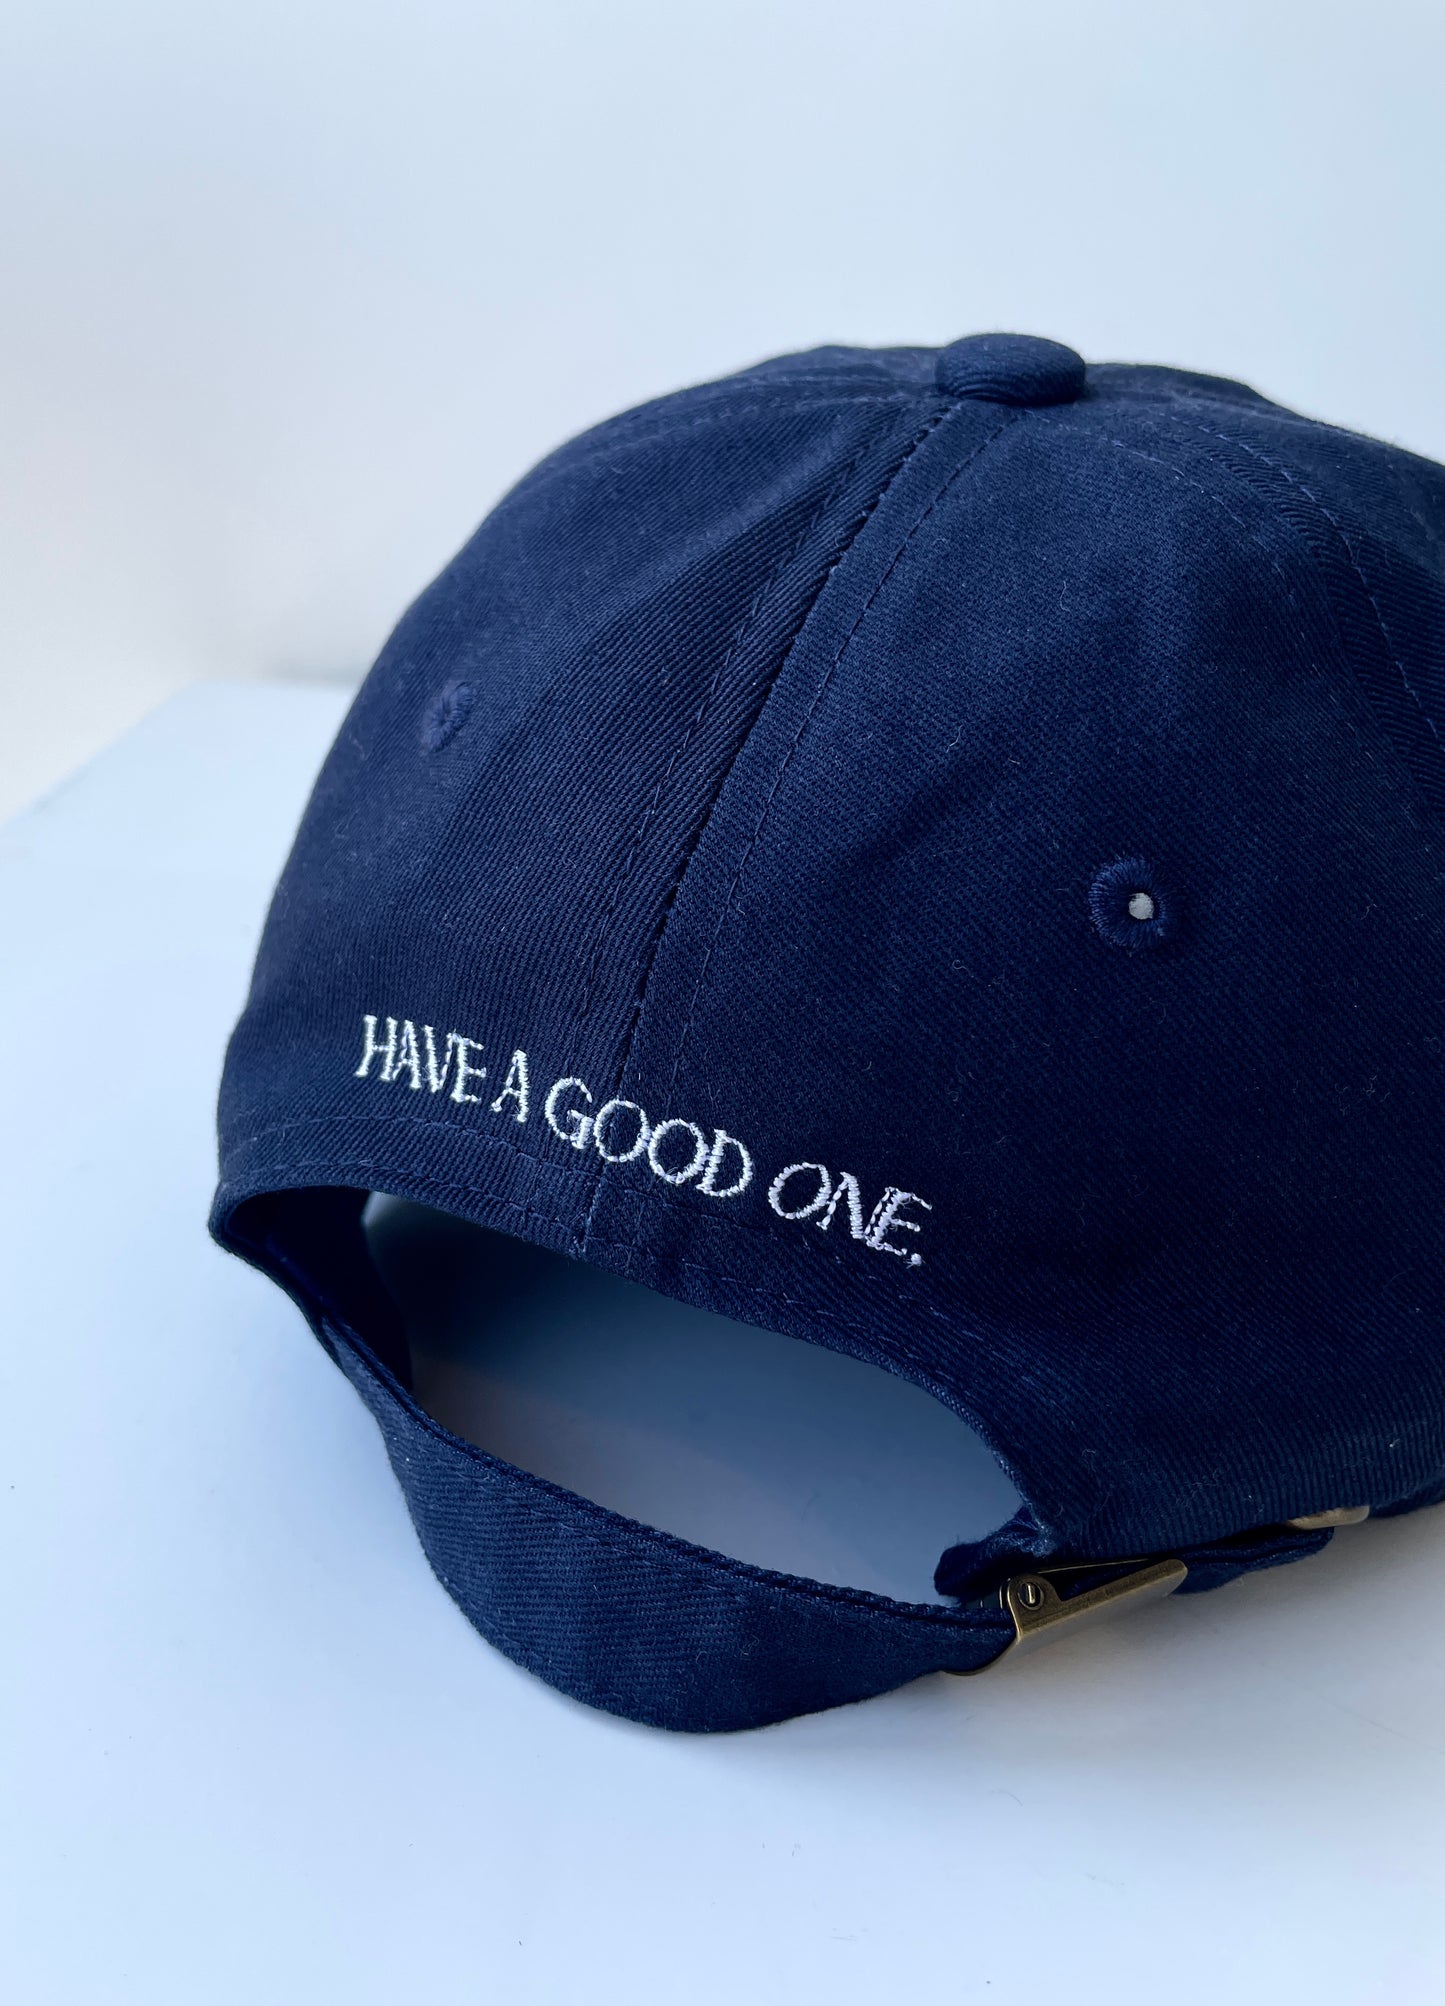 GOOD DAY Embroidery CAP Navy